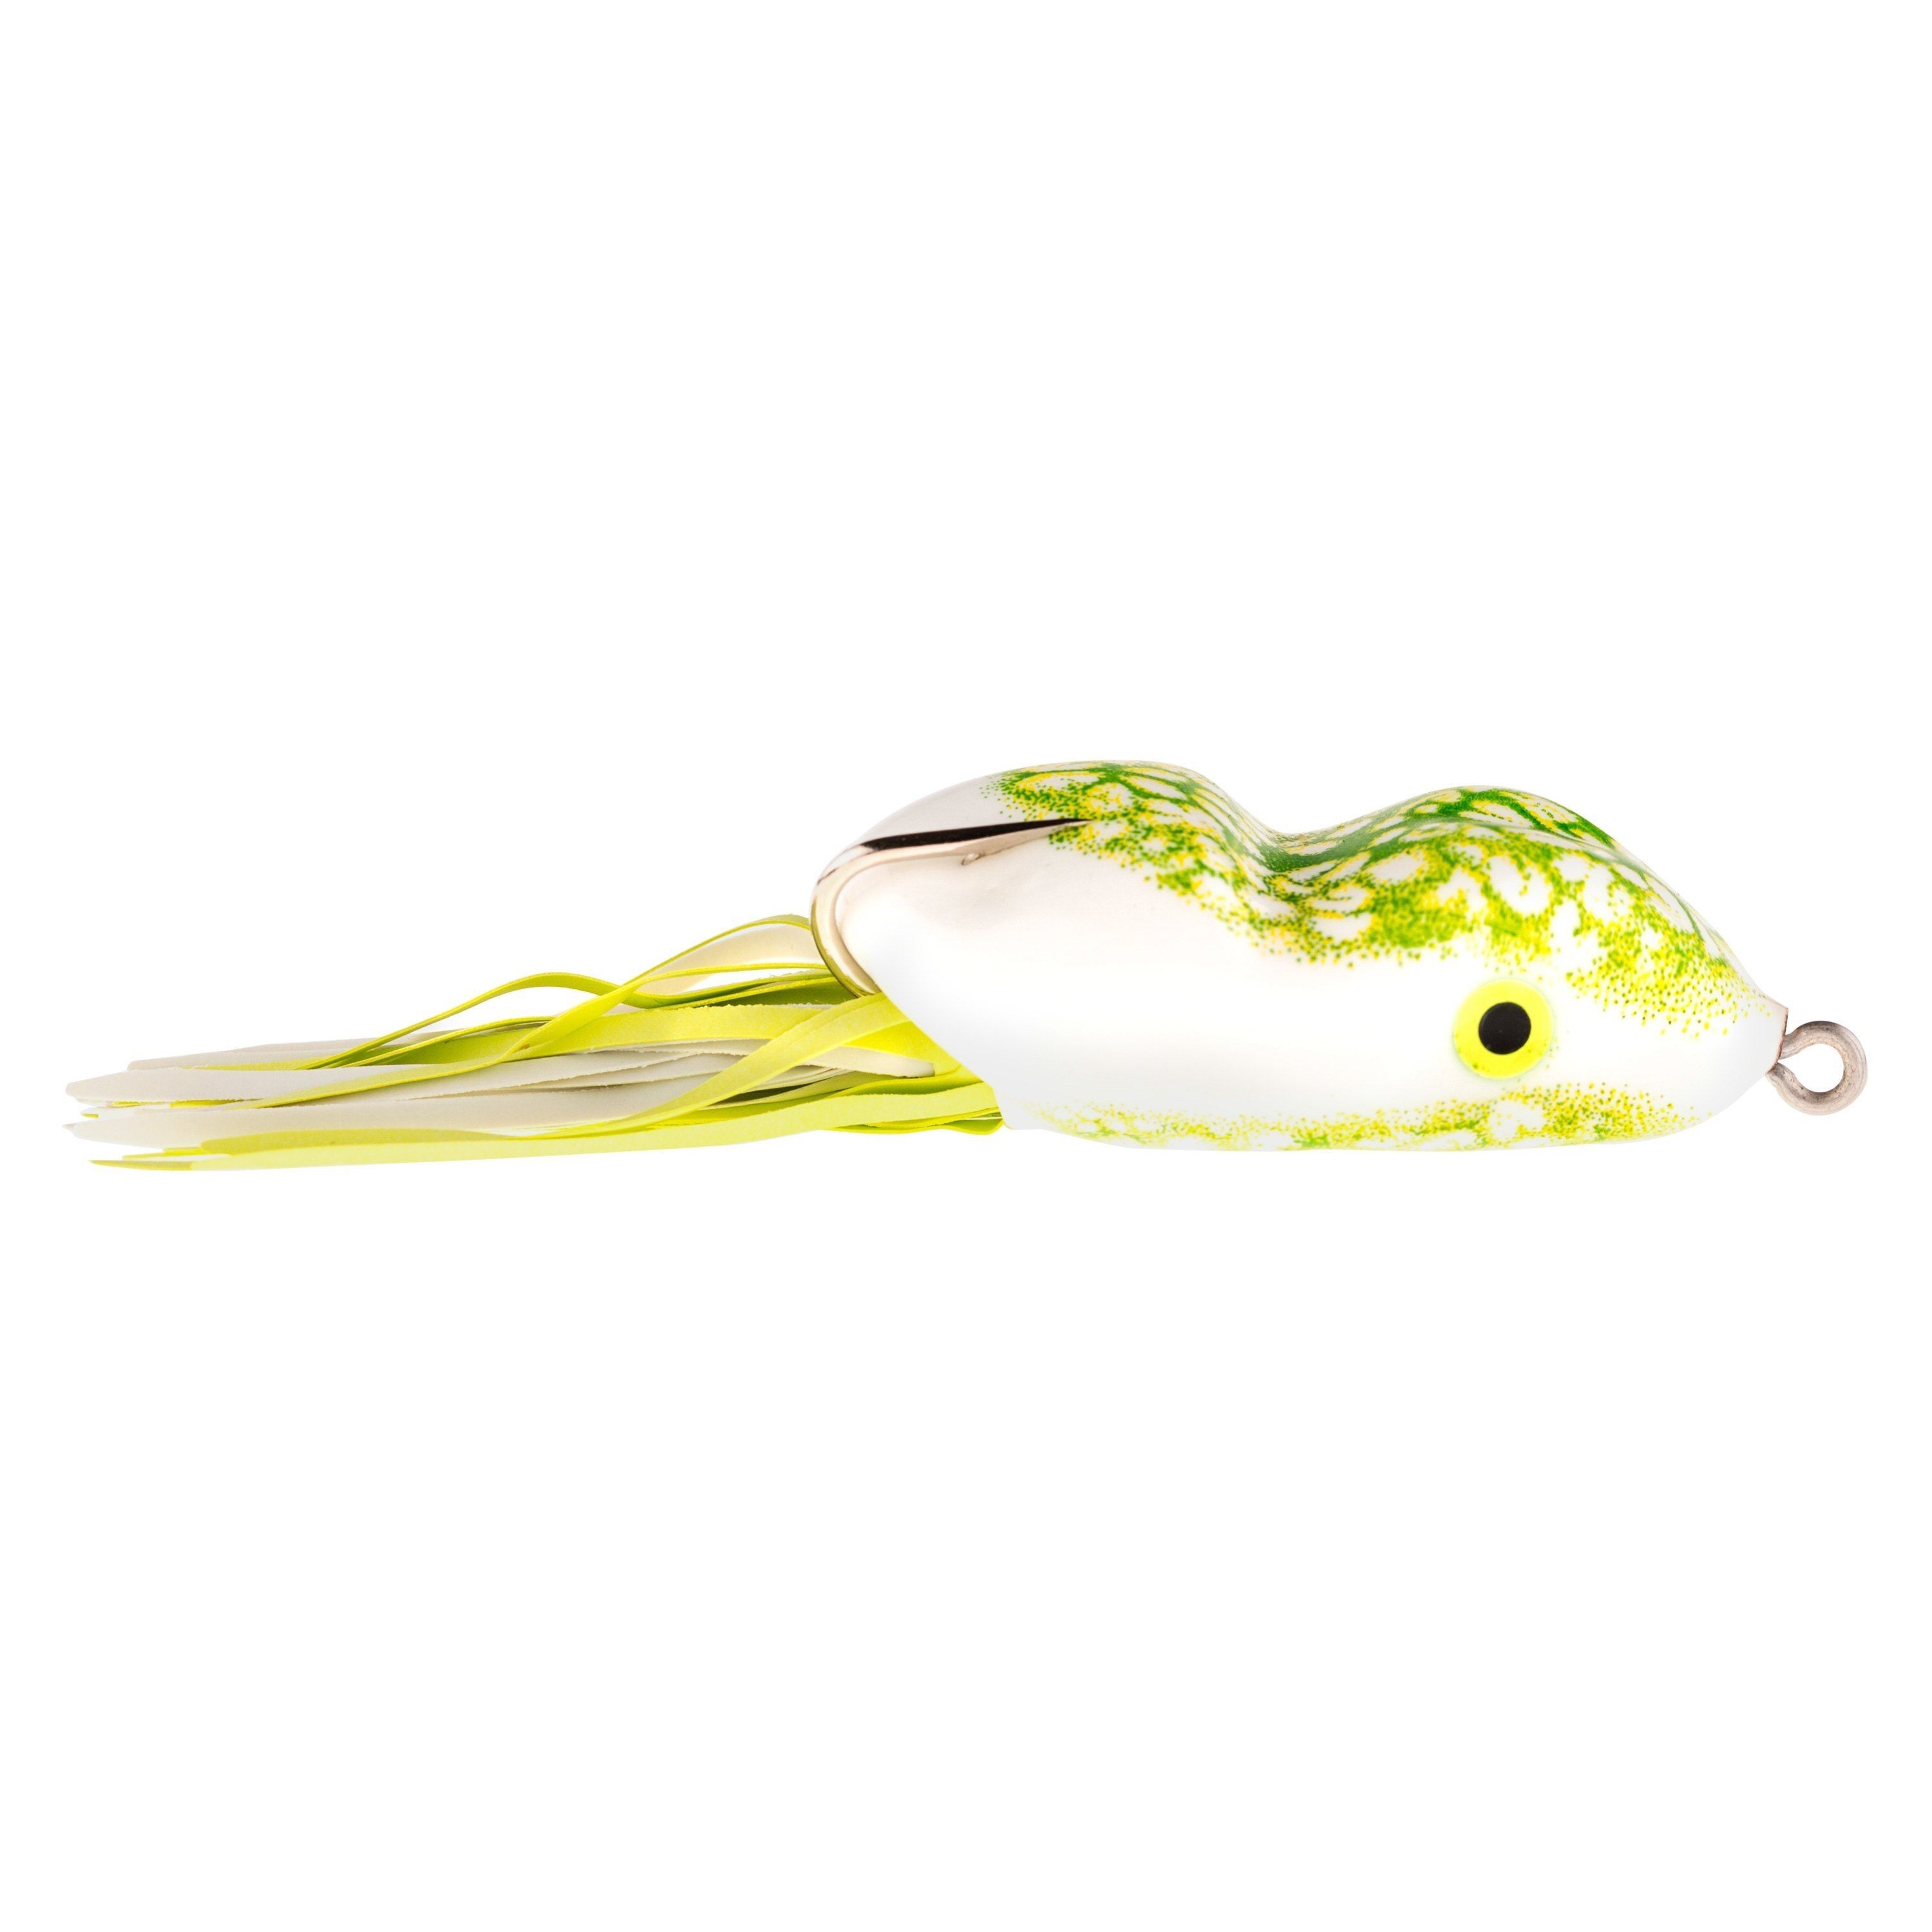 5/16 Oz Scum Frog Natural Green/Yellow Lure